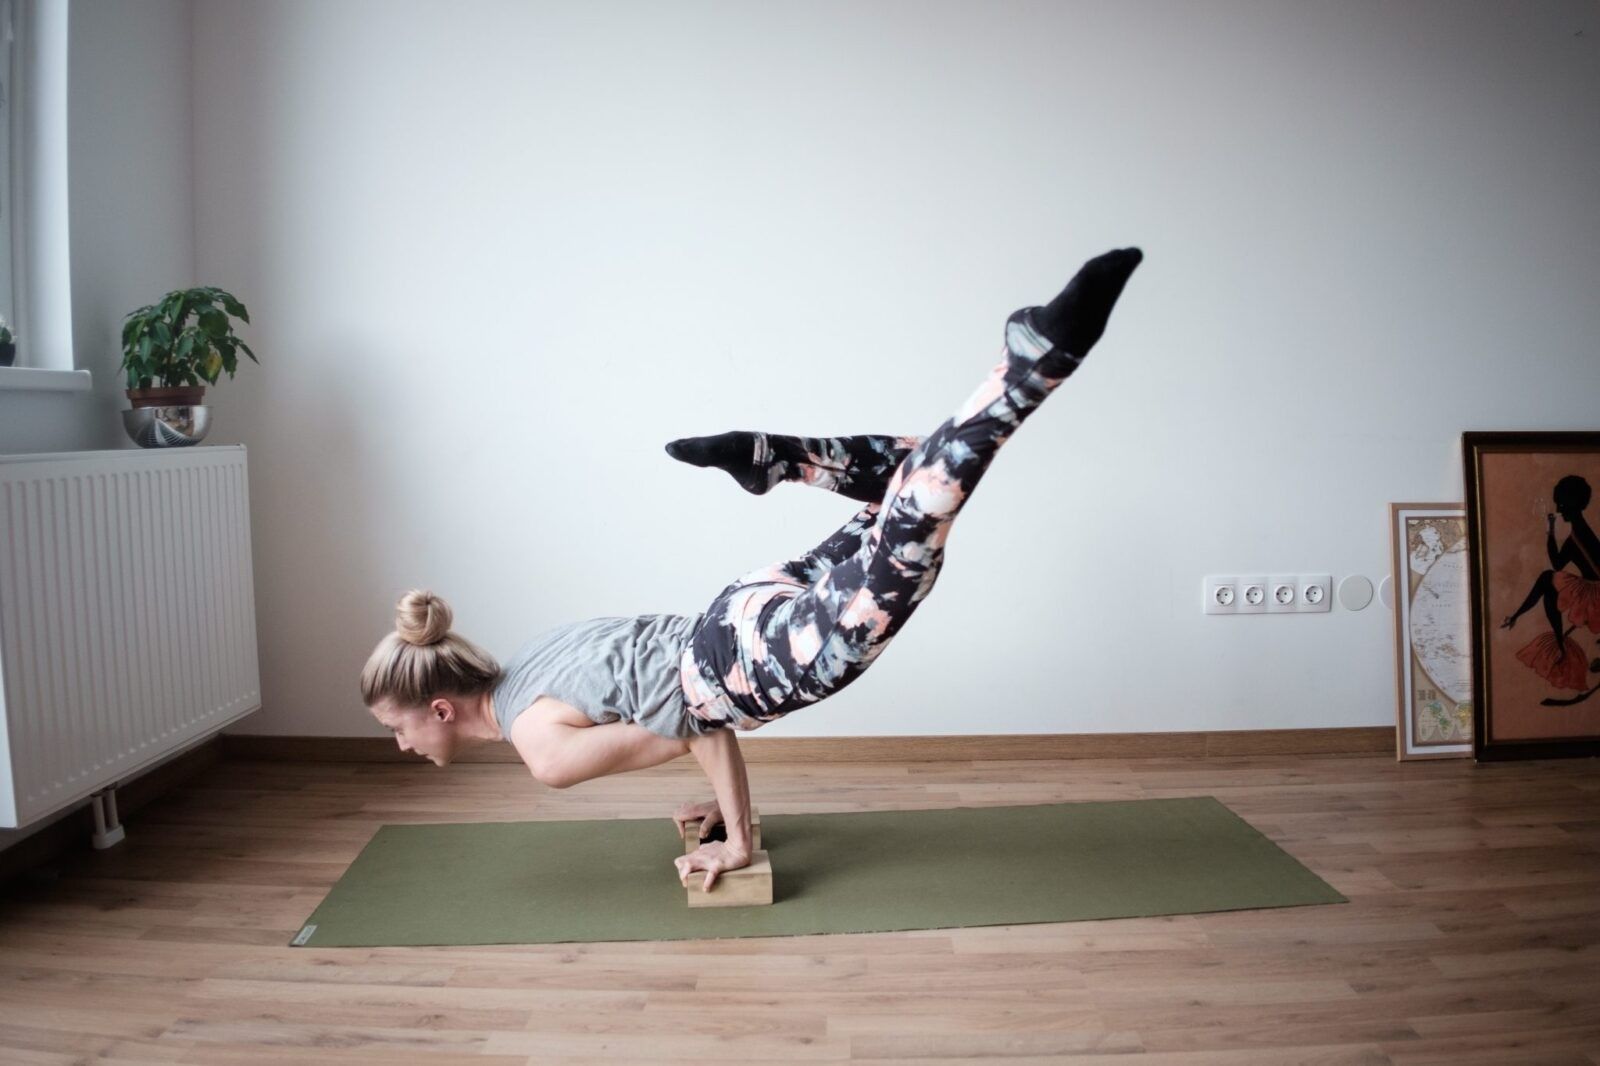 6,132 Advanced Yoga Pose Images, Stock Photos, 3D objects, & Vectors |  Shutterstock